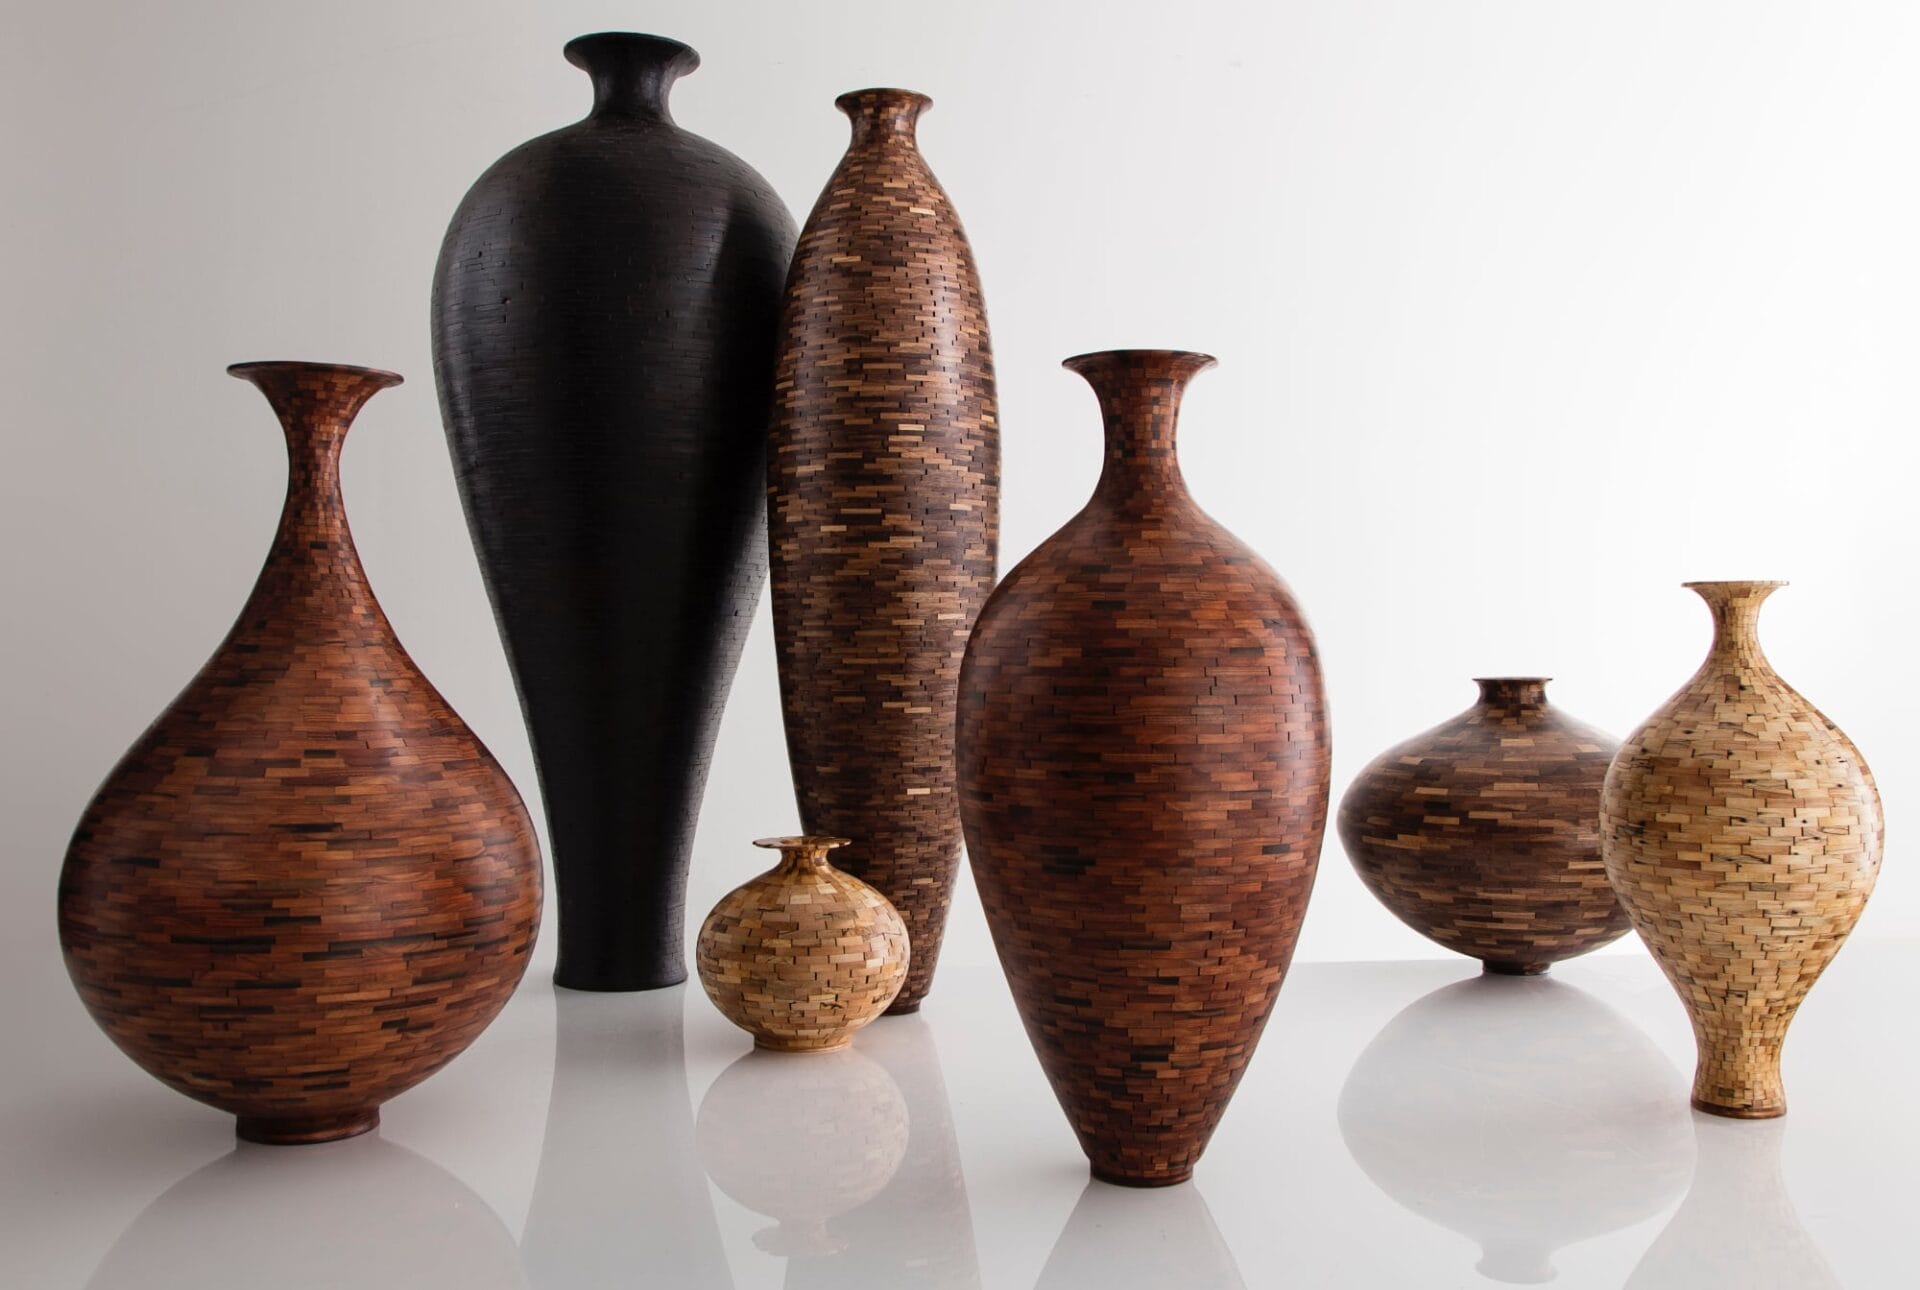 seven curvy wooden vessels made of wood components fitted together